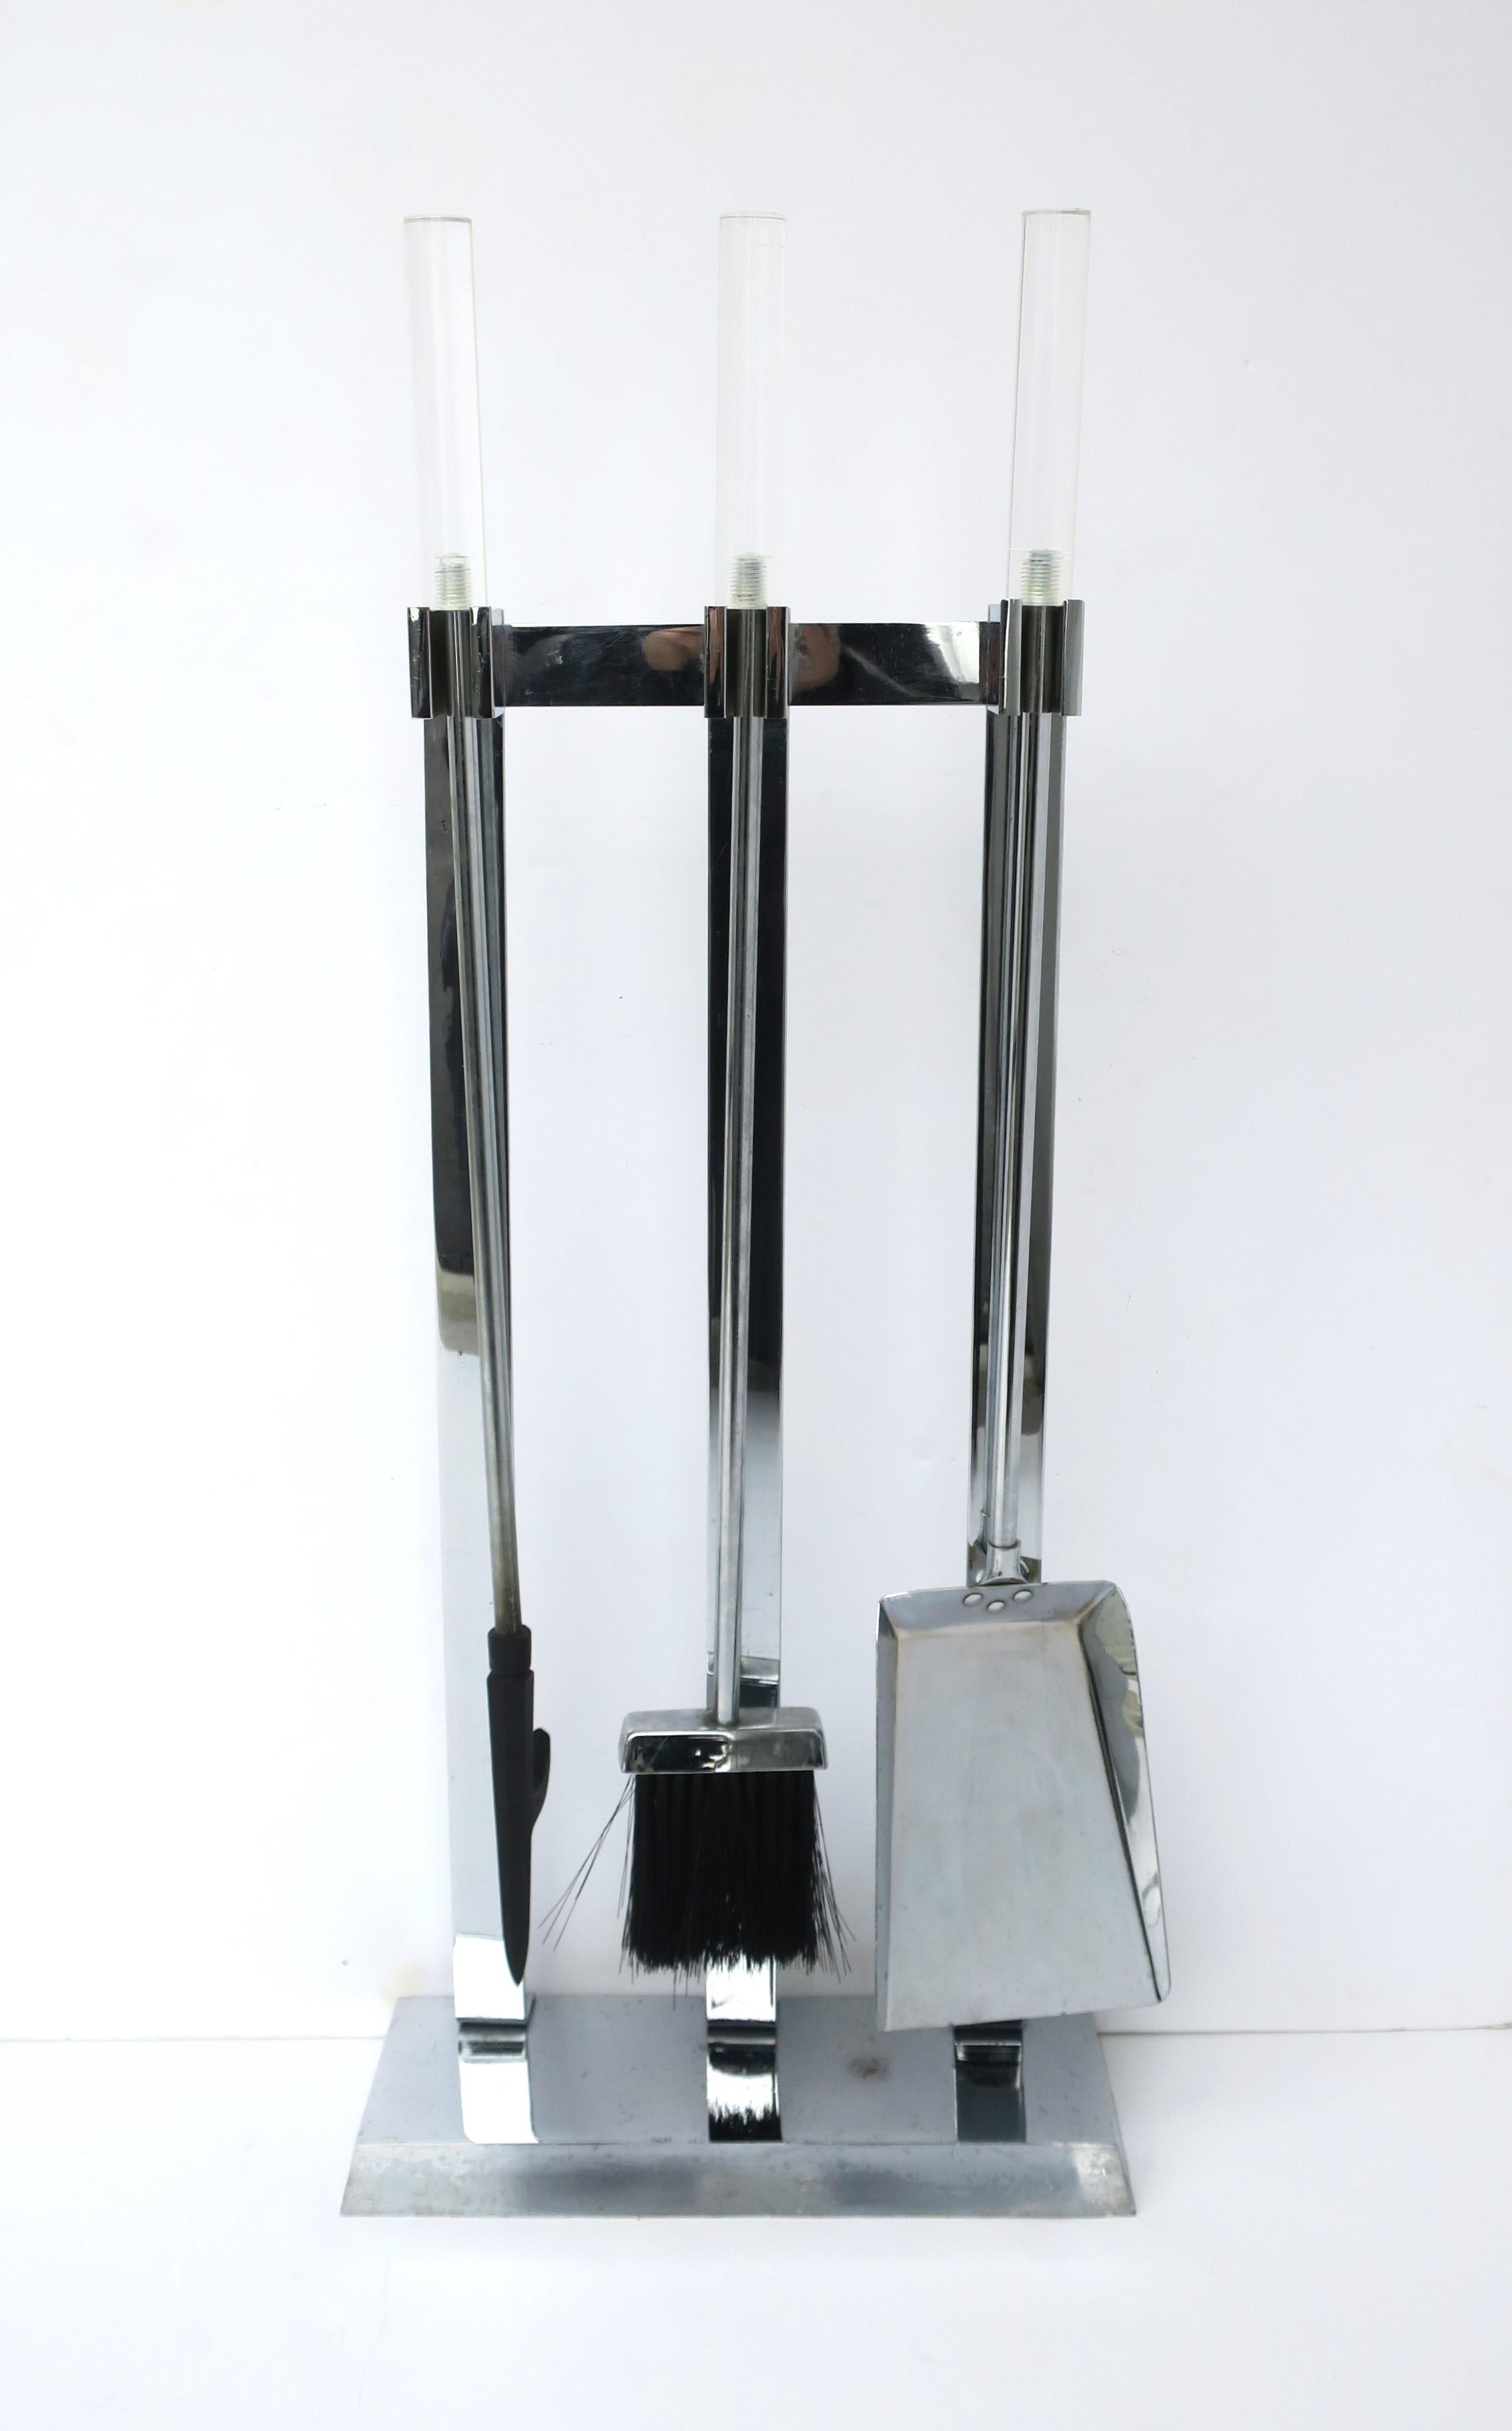 A metal chrome and Lucite fireplace tool set, in the Modern style, attributed to designer Alessandro Albrizzi, circa late-20th century. Set consists of a stand, poker, brush, and shovel; tools have Lucite handles. Tools appear to have never been